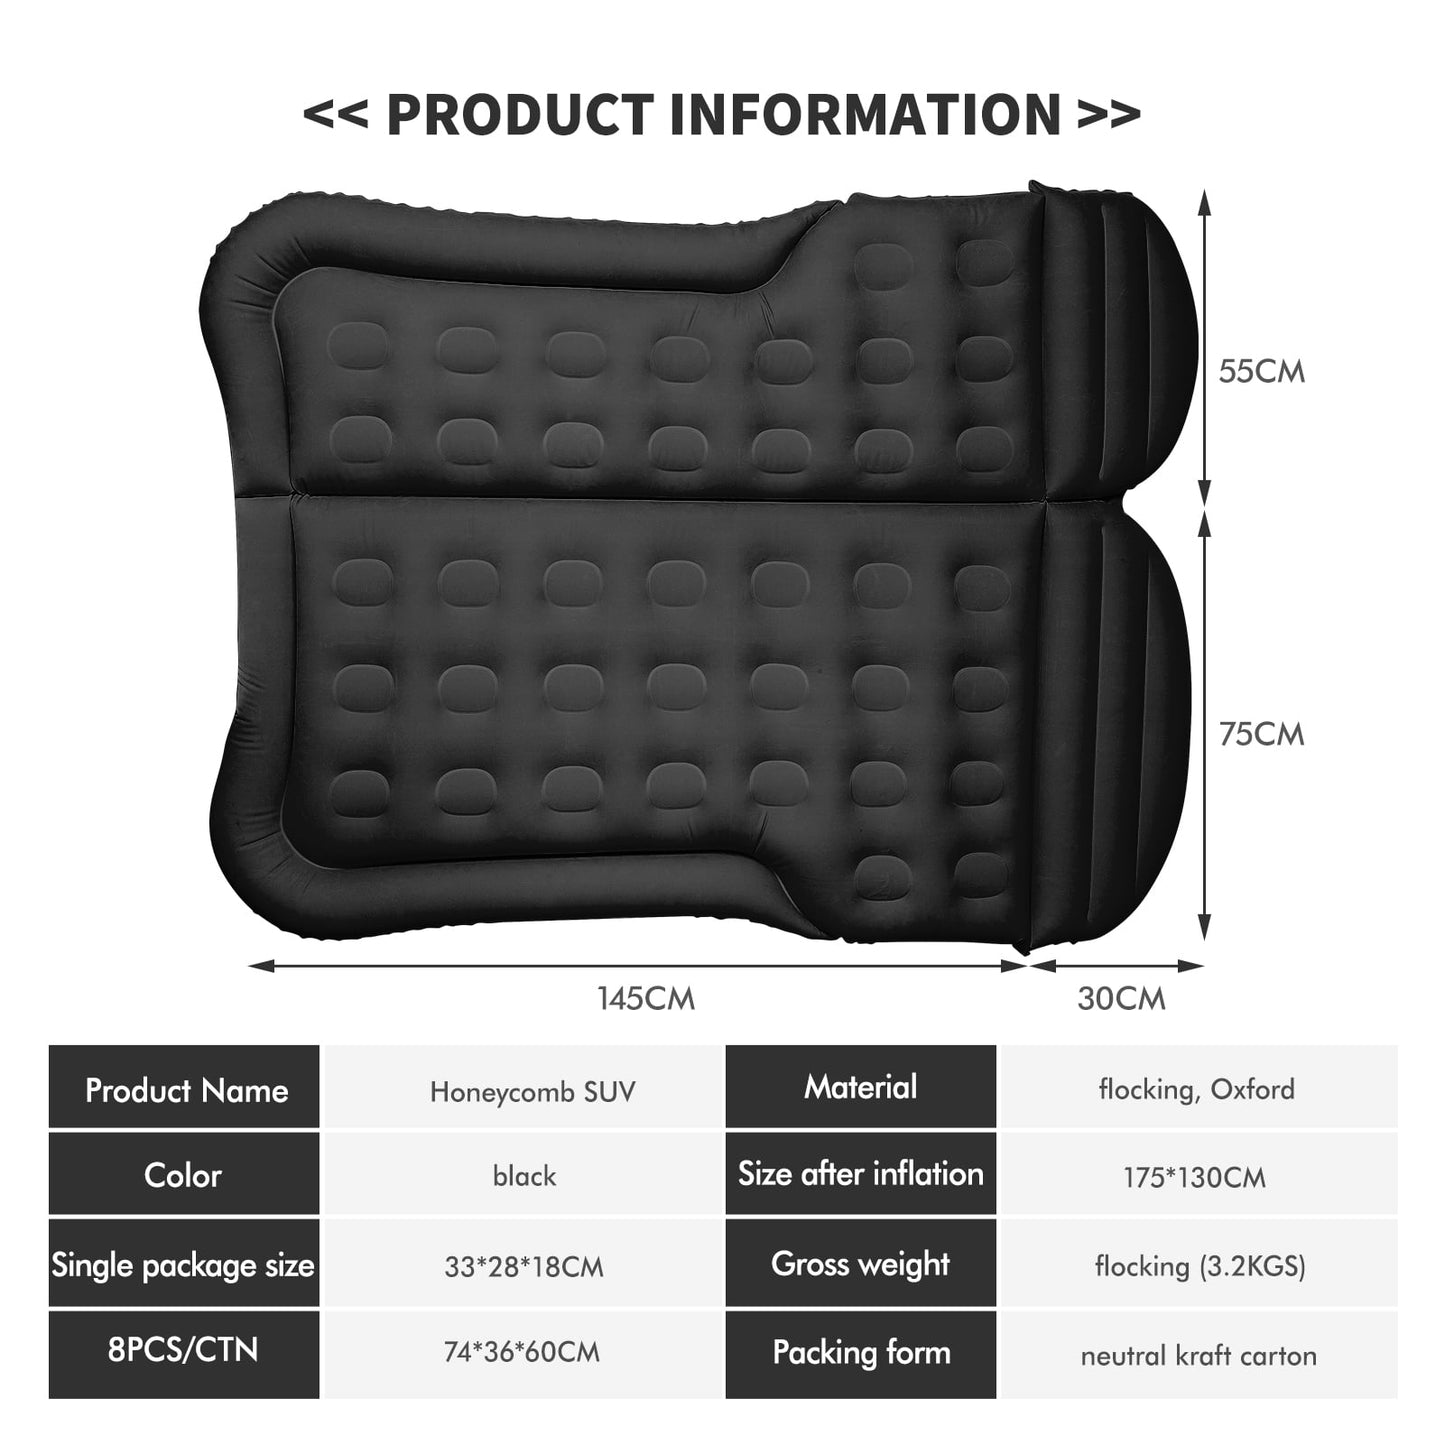 Inflatable Car Air Mattress and Travel Bed for Roadtrips and Camping